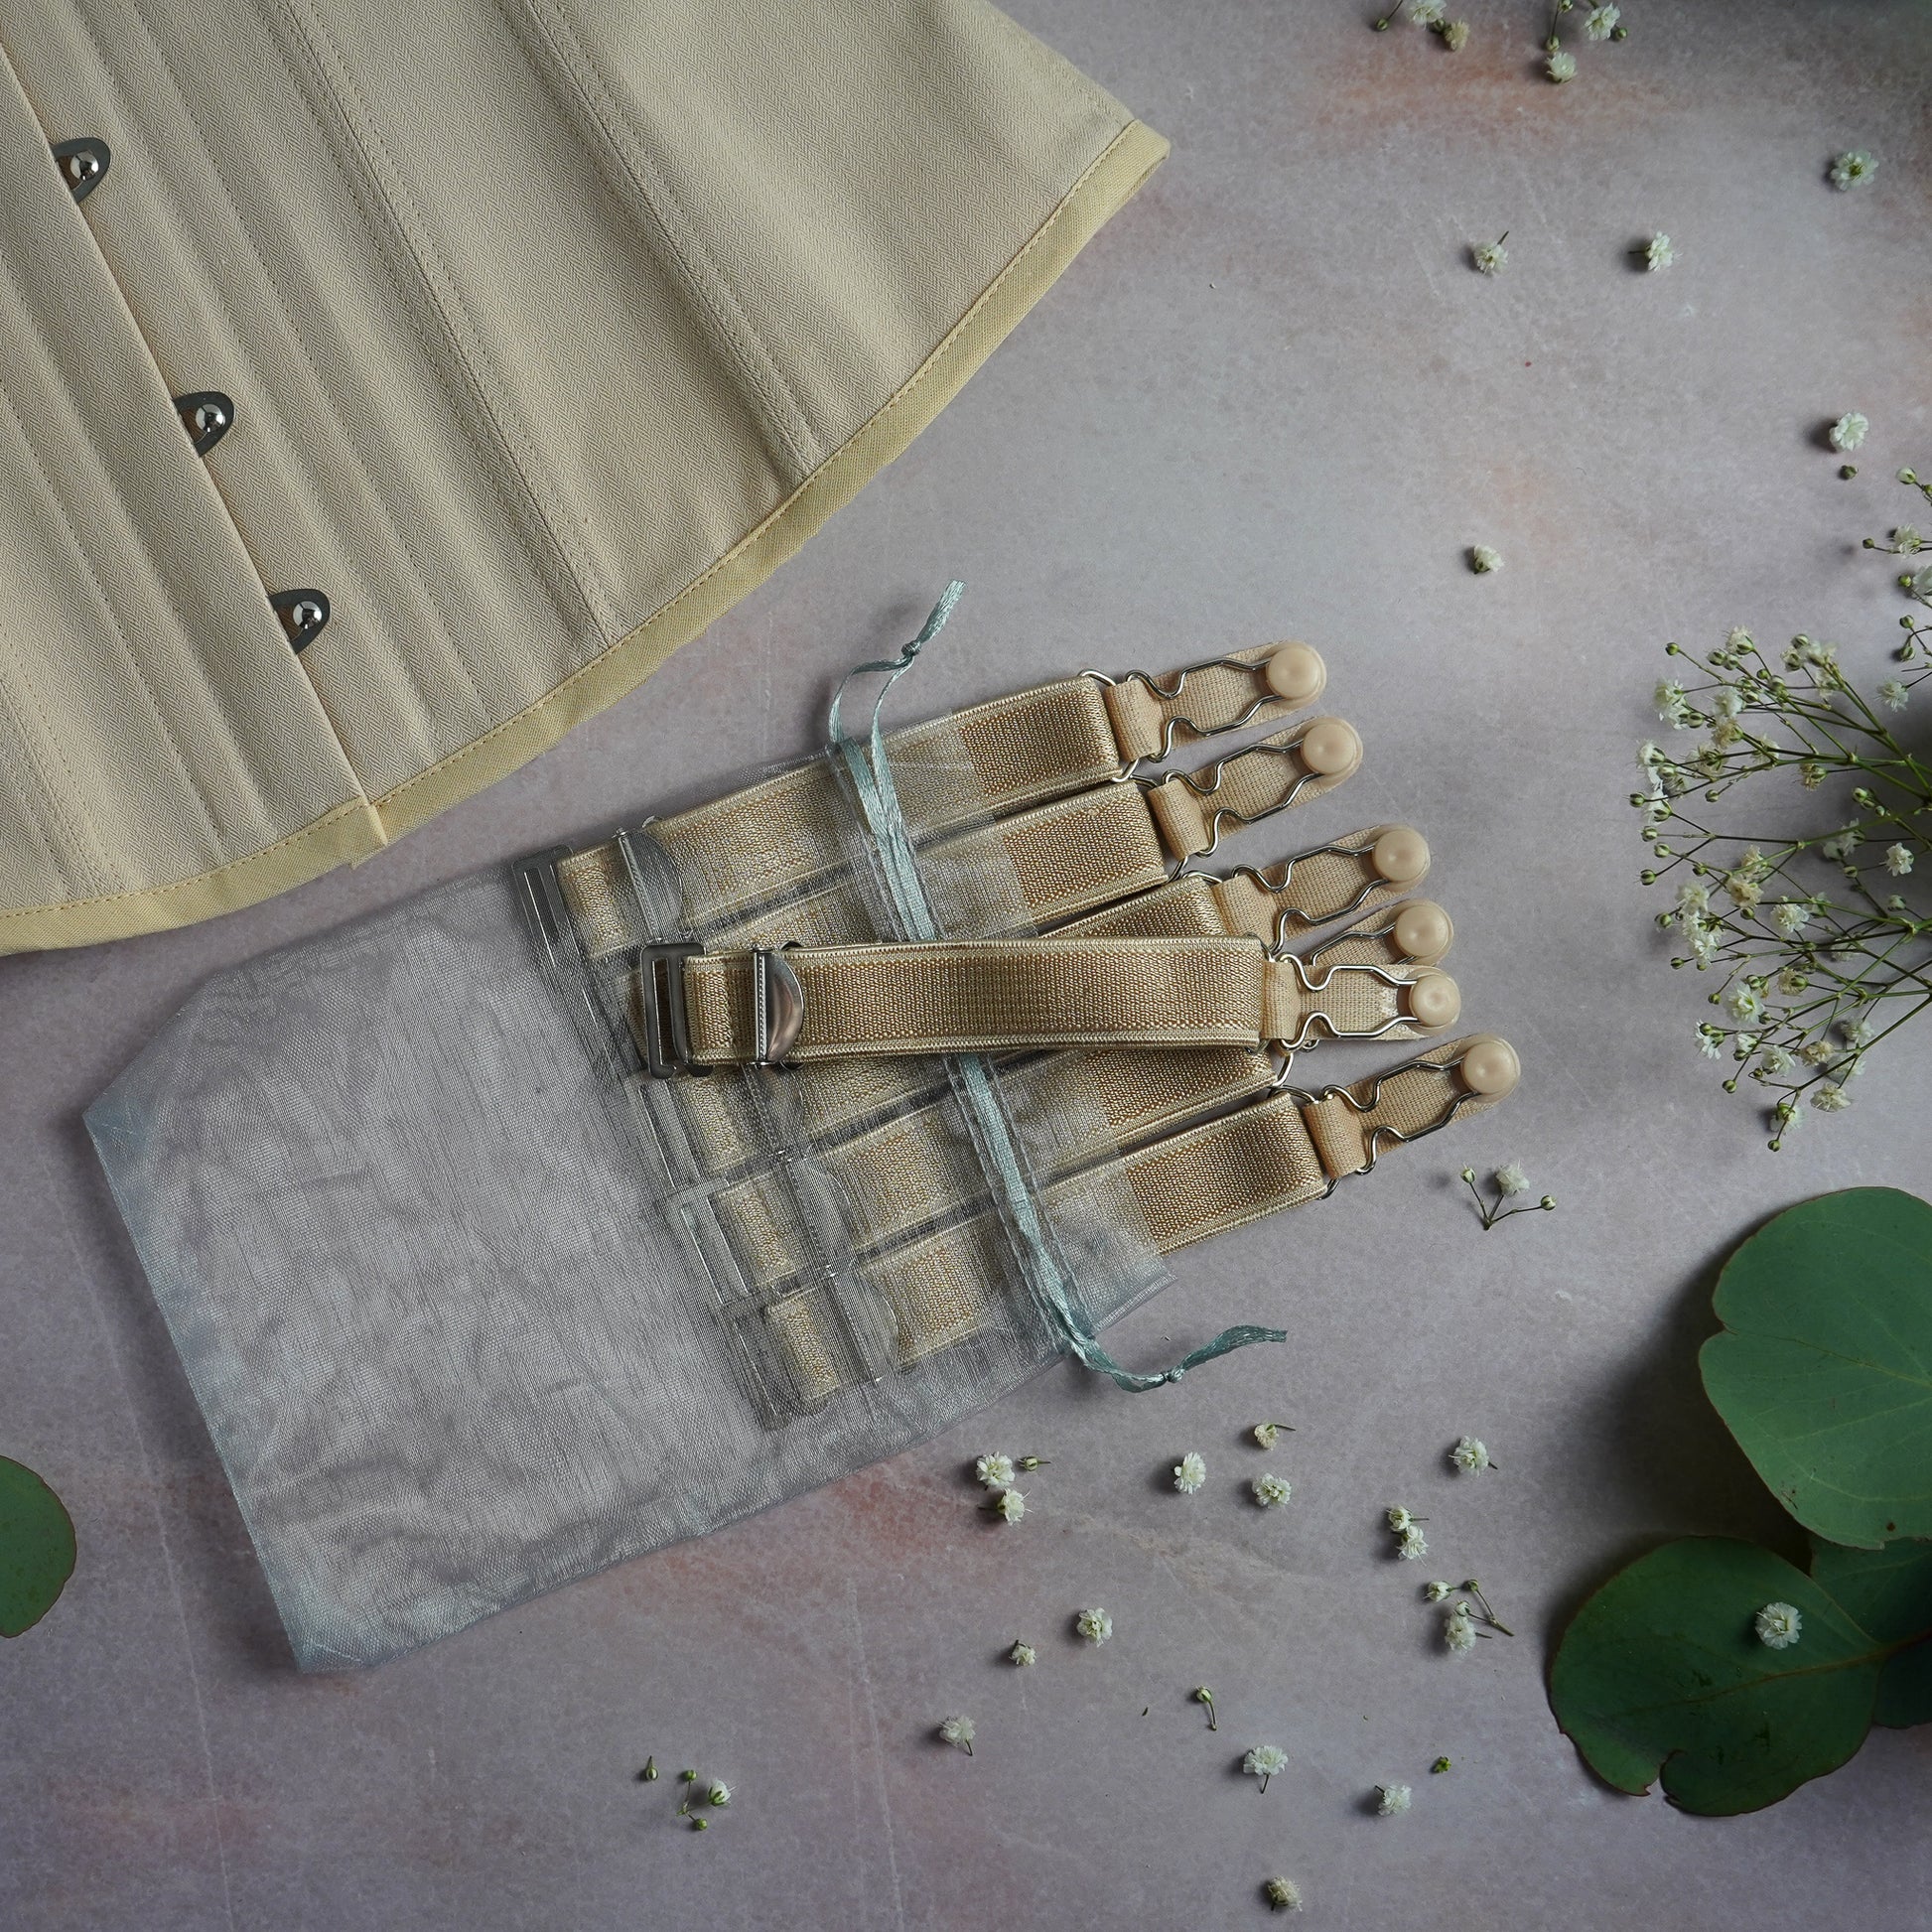 A set of 6 beige suspenders with a matching corset